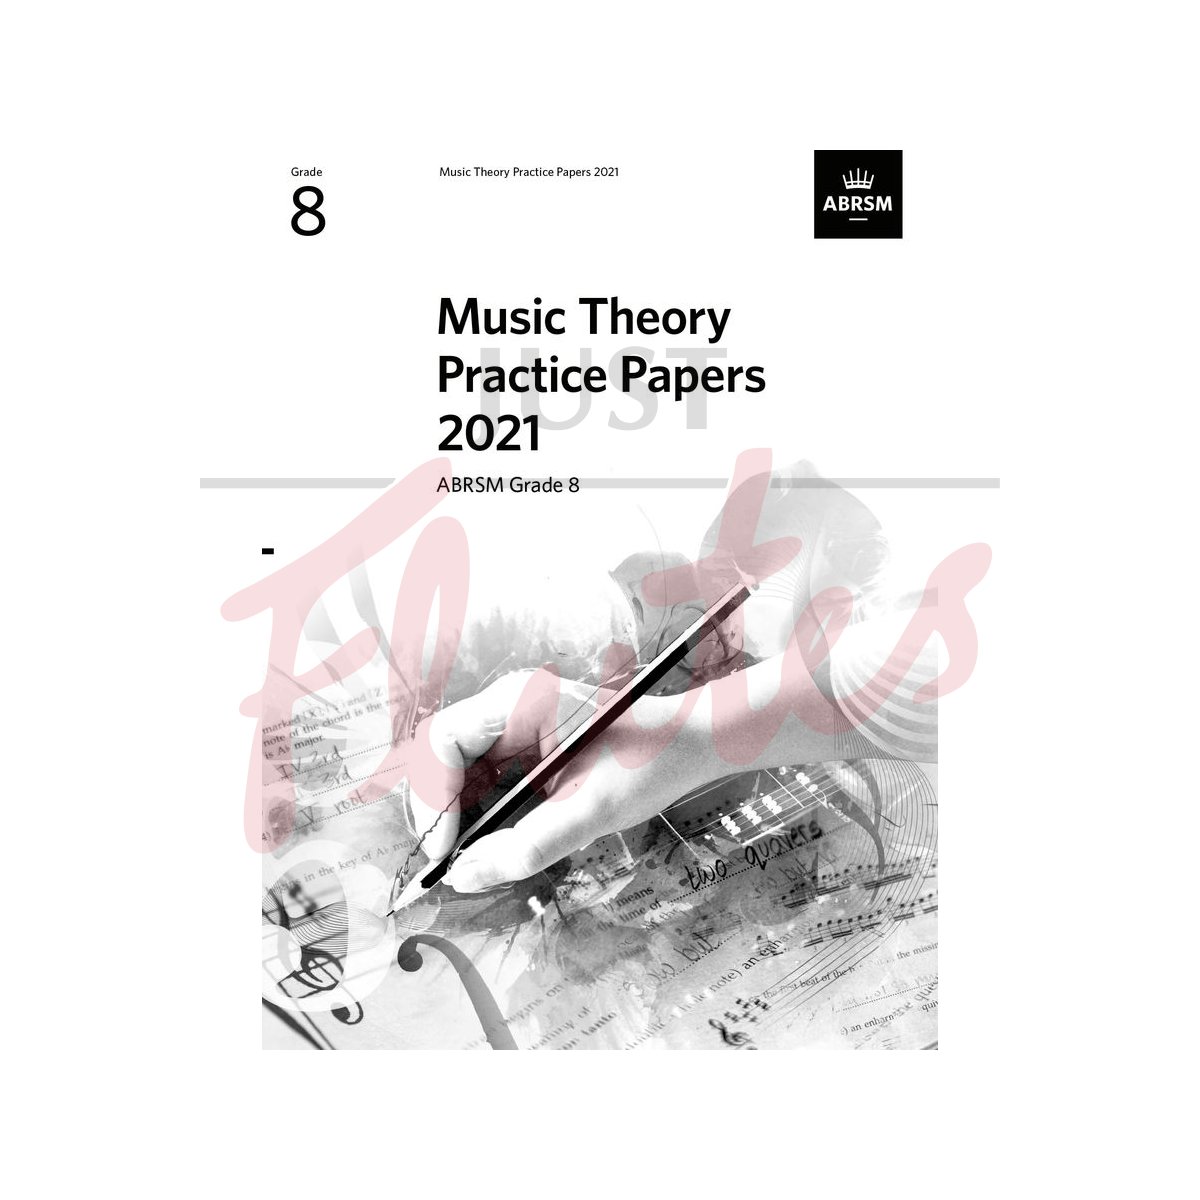 Music Theory Practice Papers 2021 Grade 8